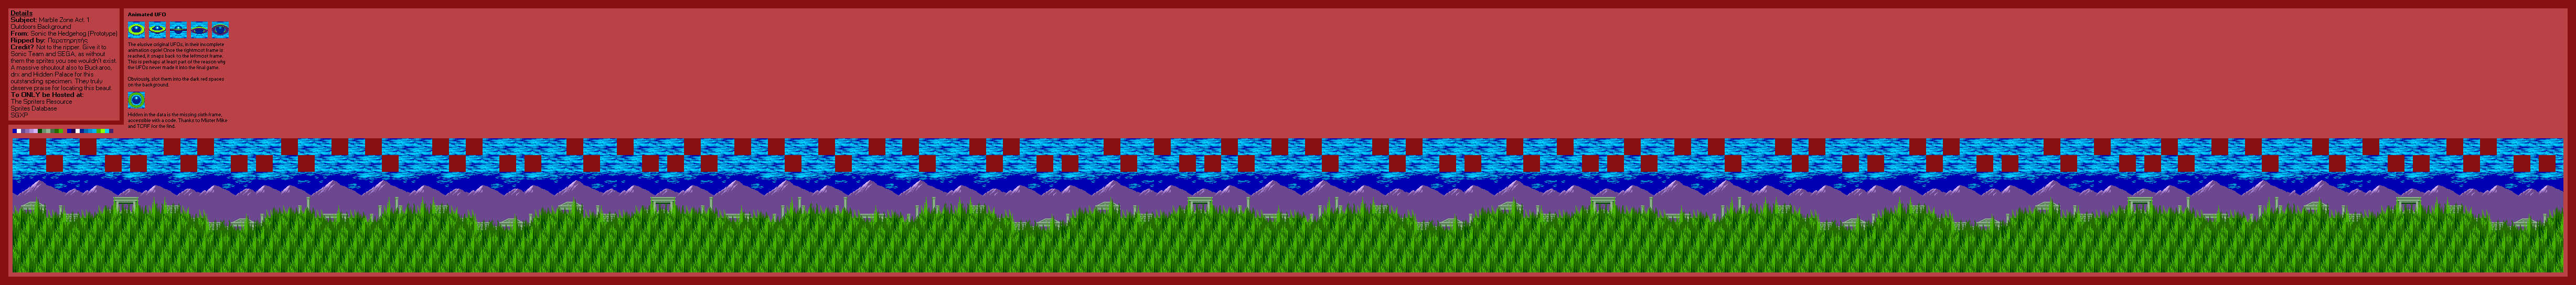 sonic marble zone download